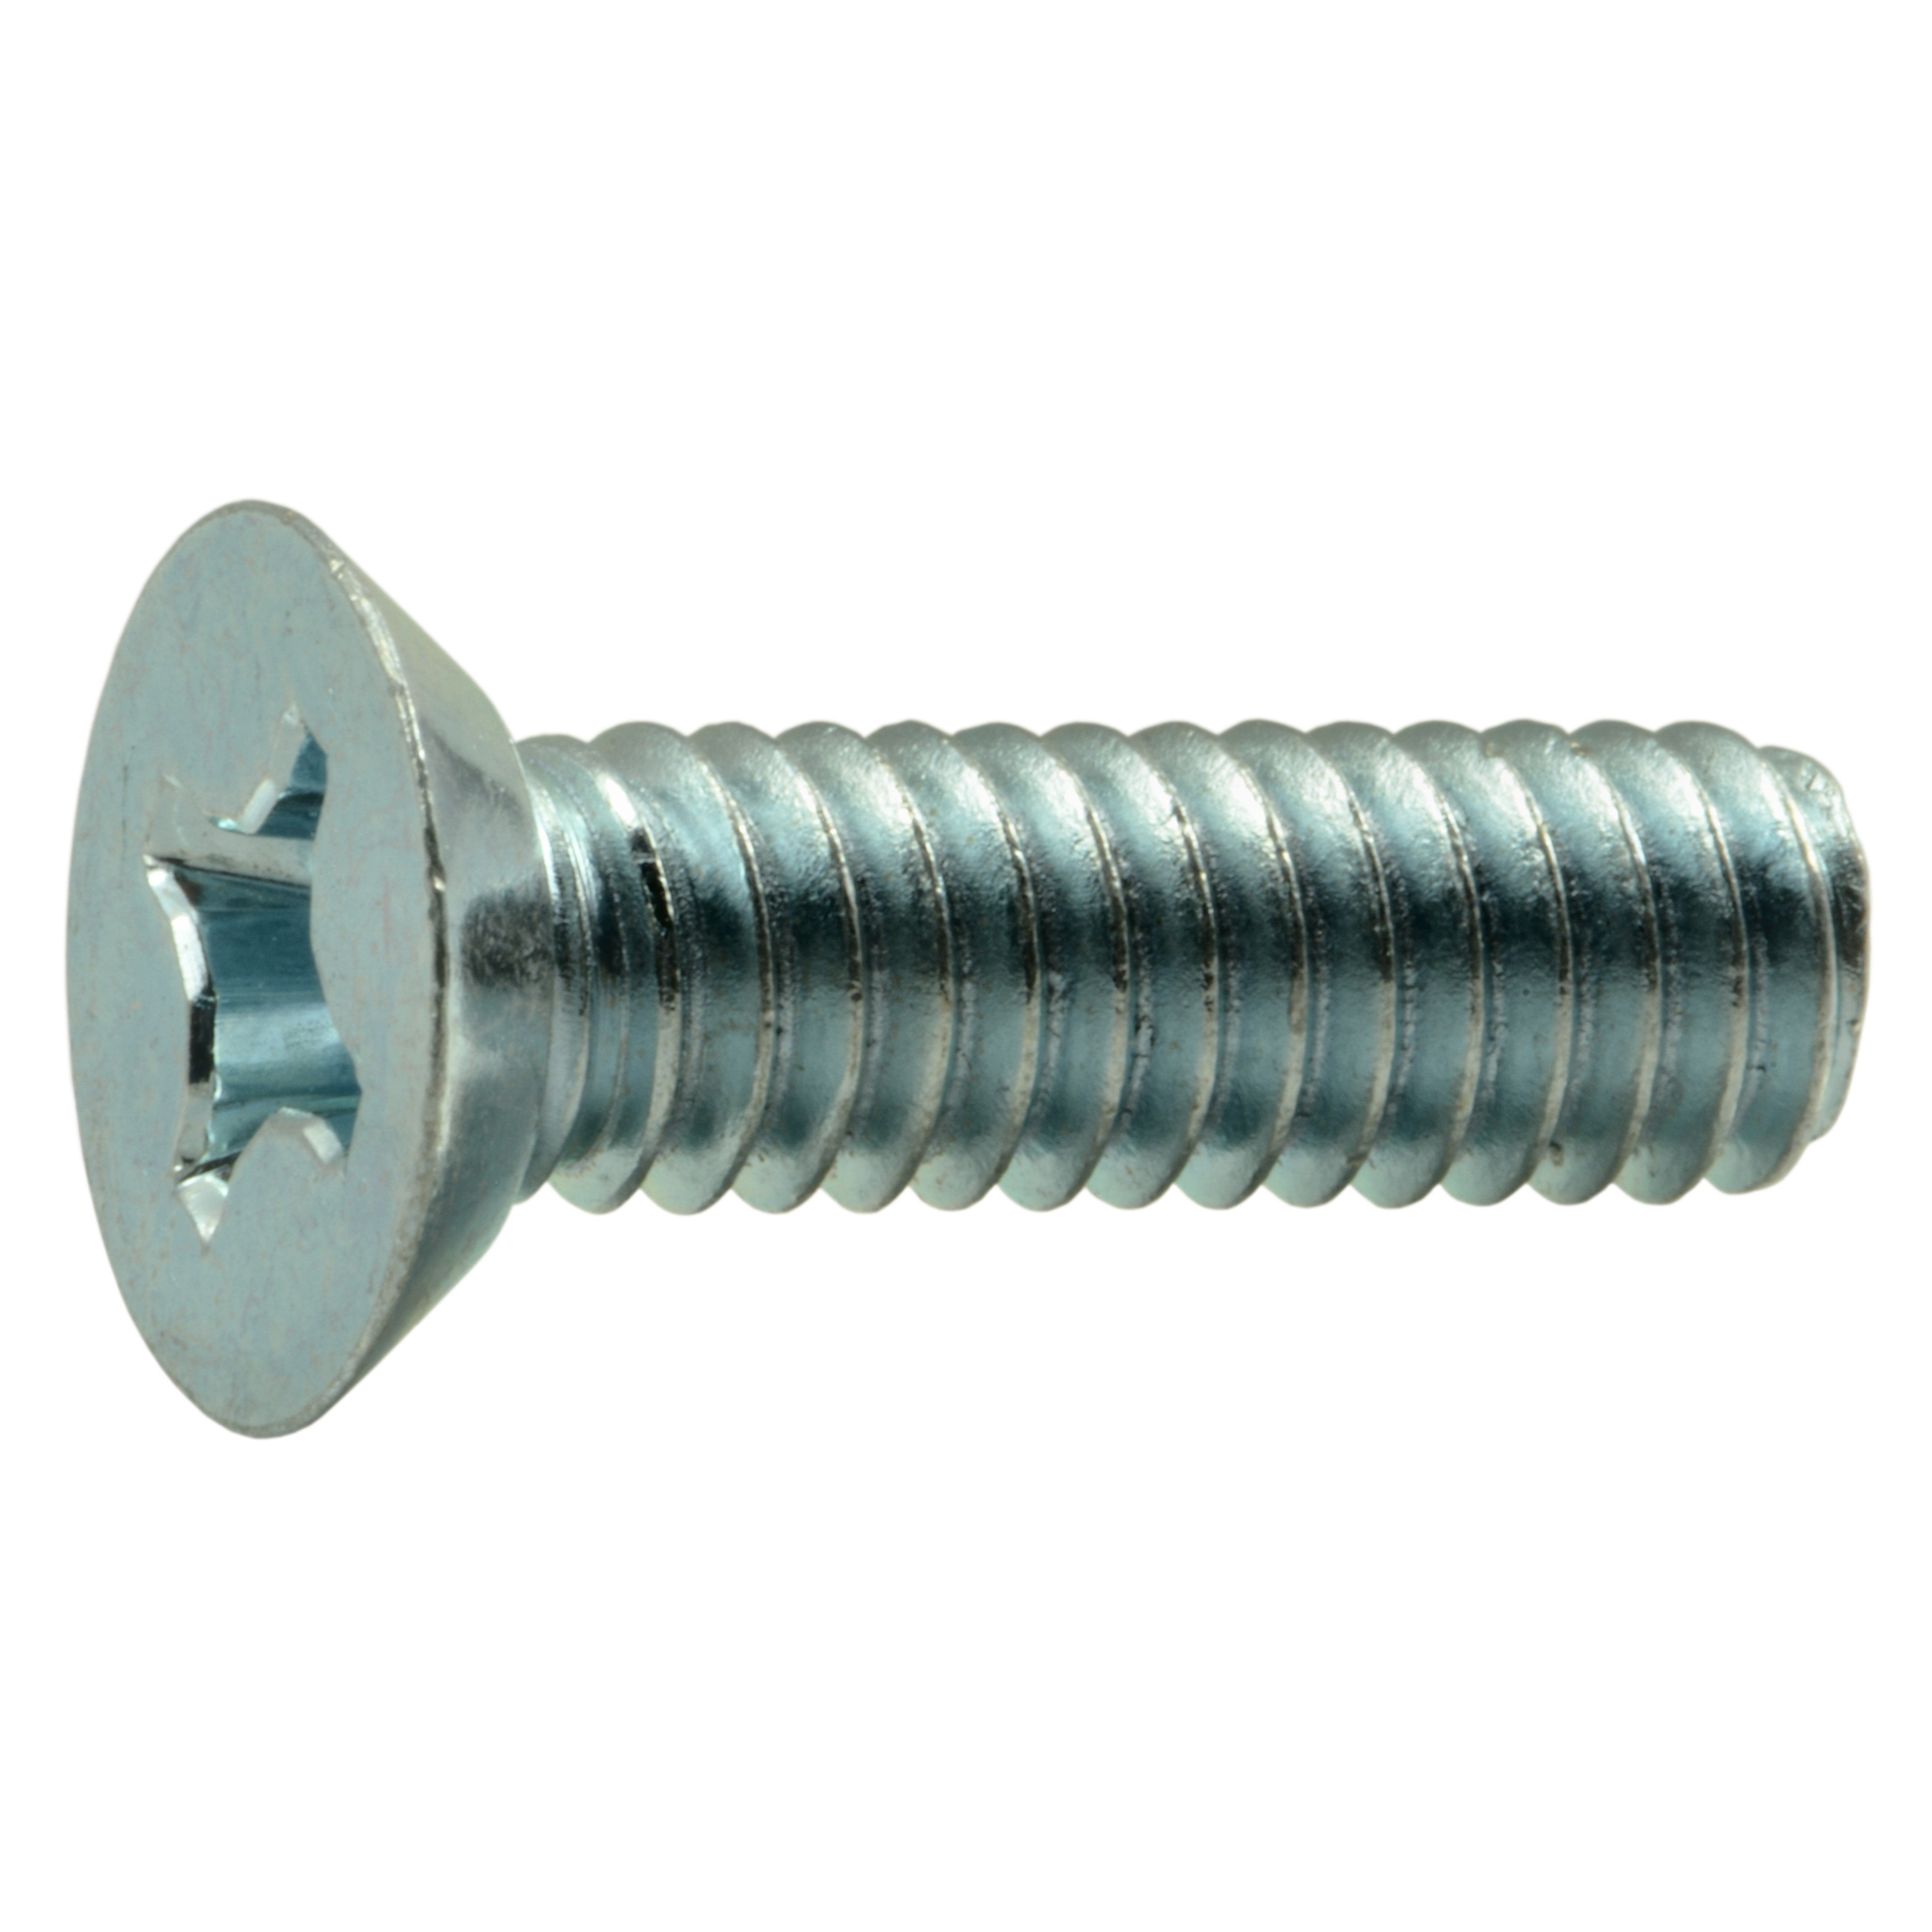 Steel Thread Cutting Screw Pack of 9000 Zinc Plated Finish #6-32 Thread Size Pack of 9000 Small Parts 06163PP 1 Length Phillips Drive Type 23 Pan Head 1 Length